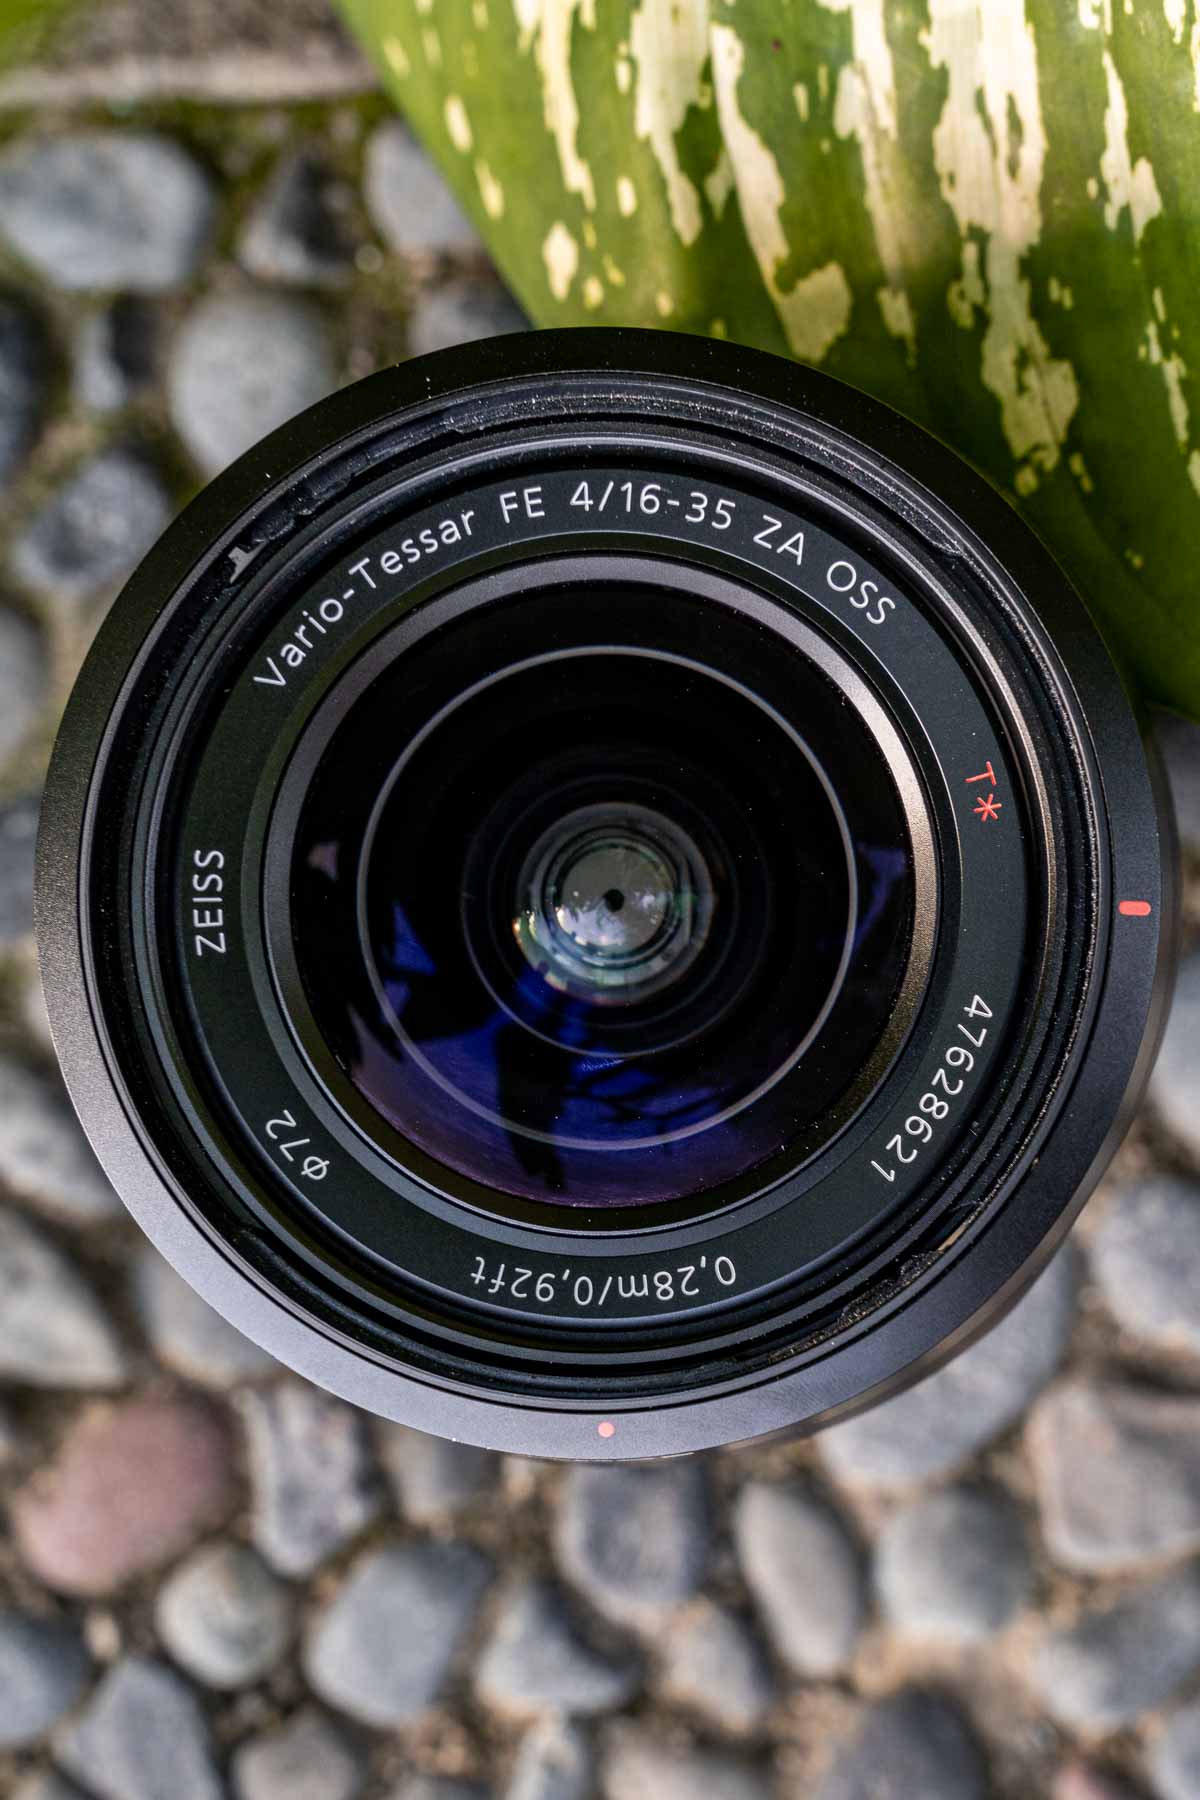 Sony 16-35mm f4 wide angle lens